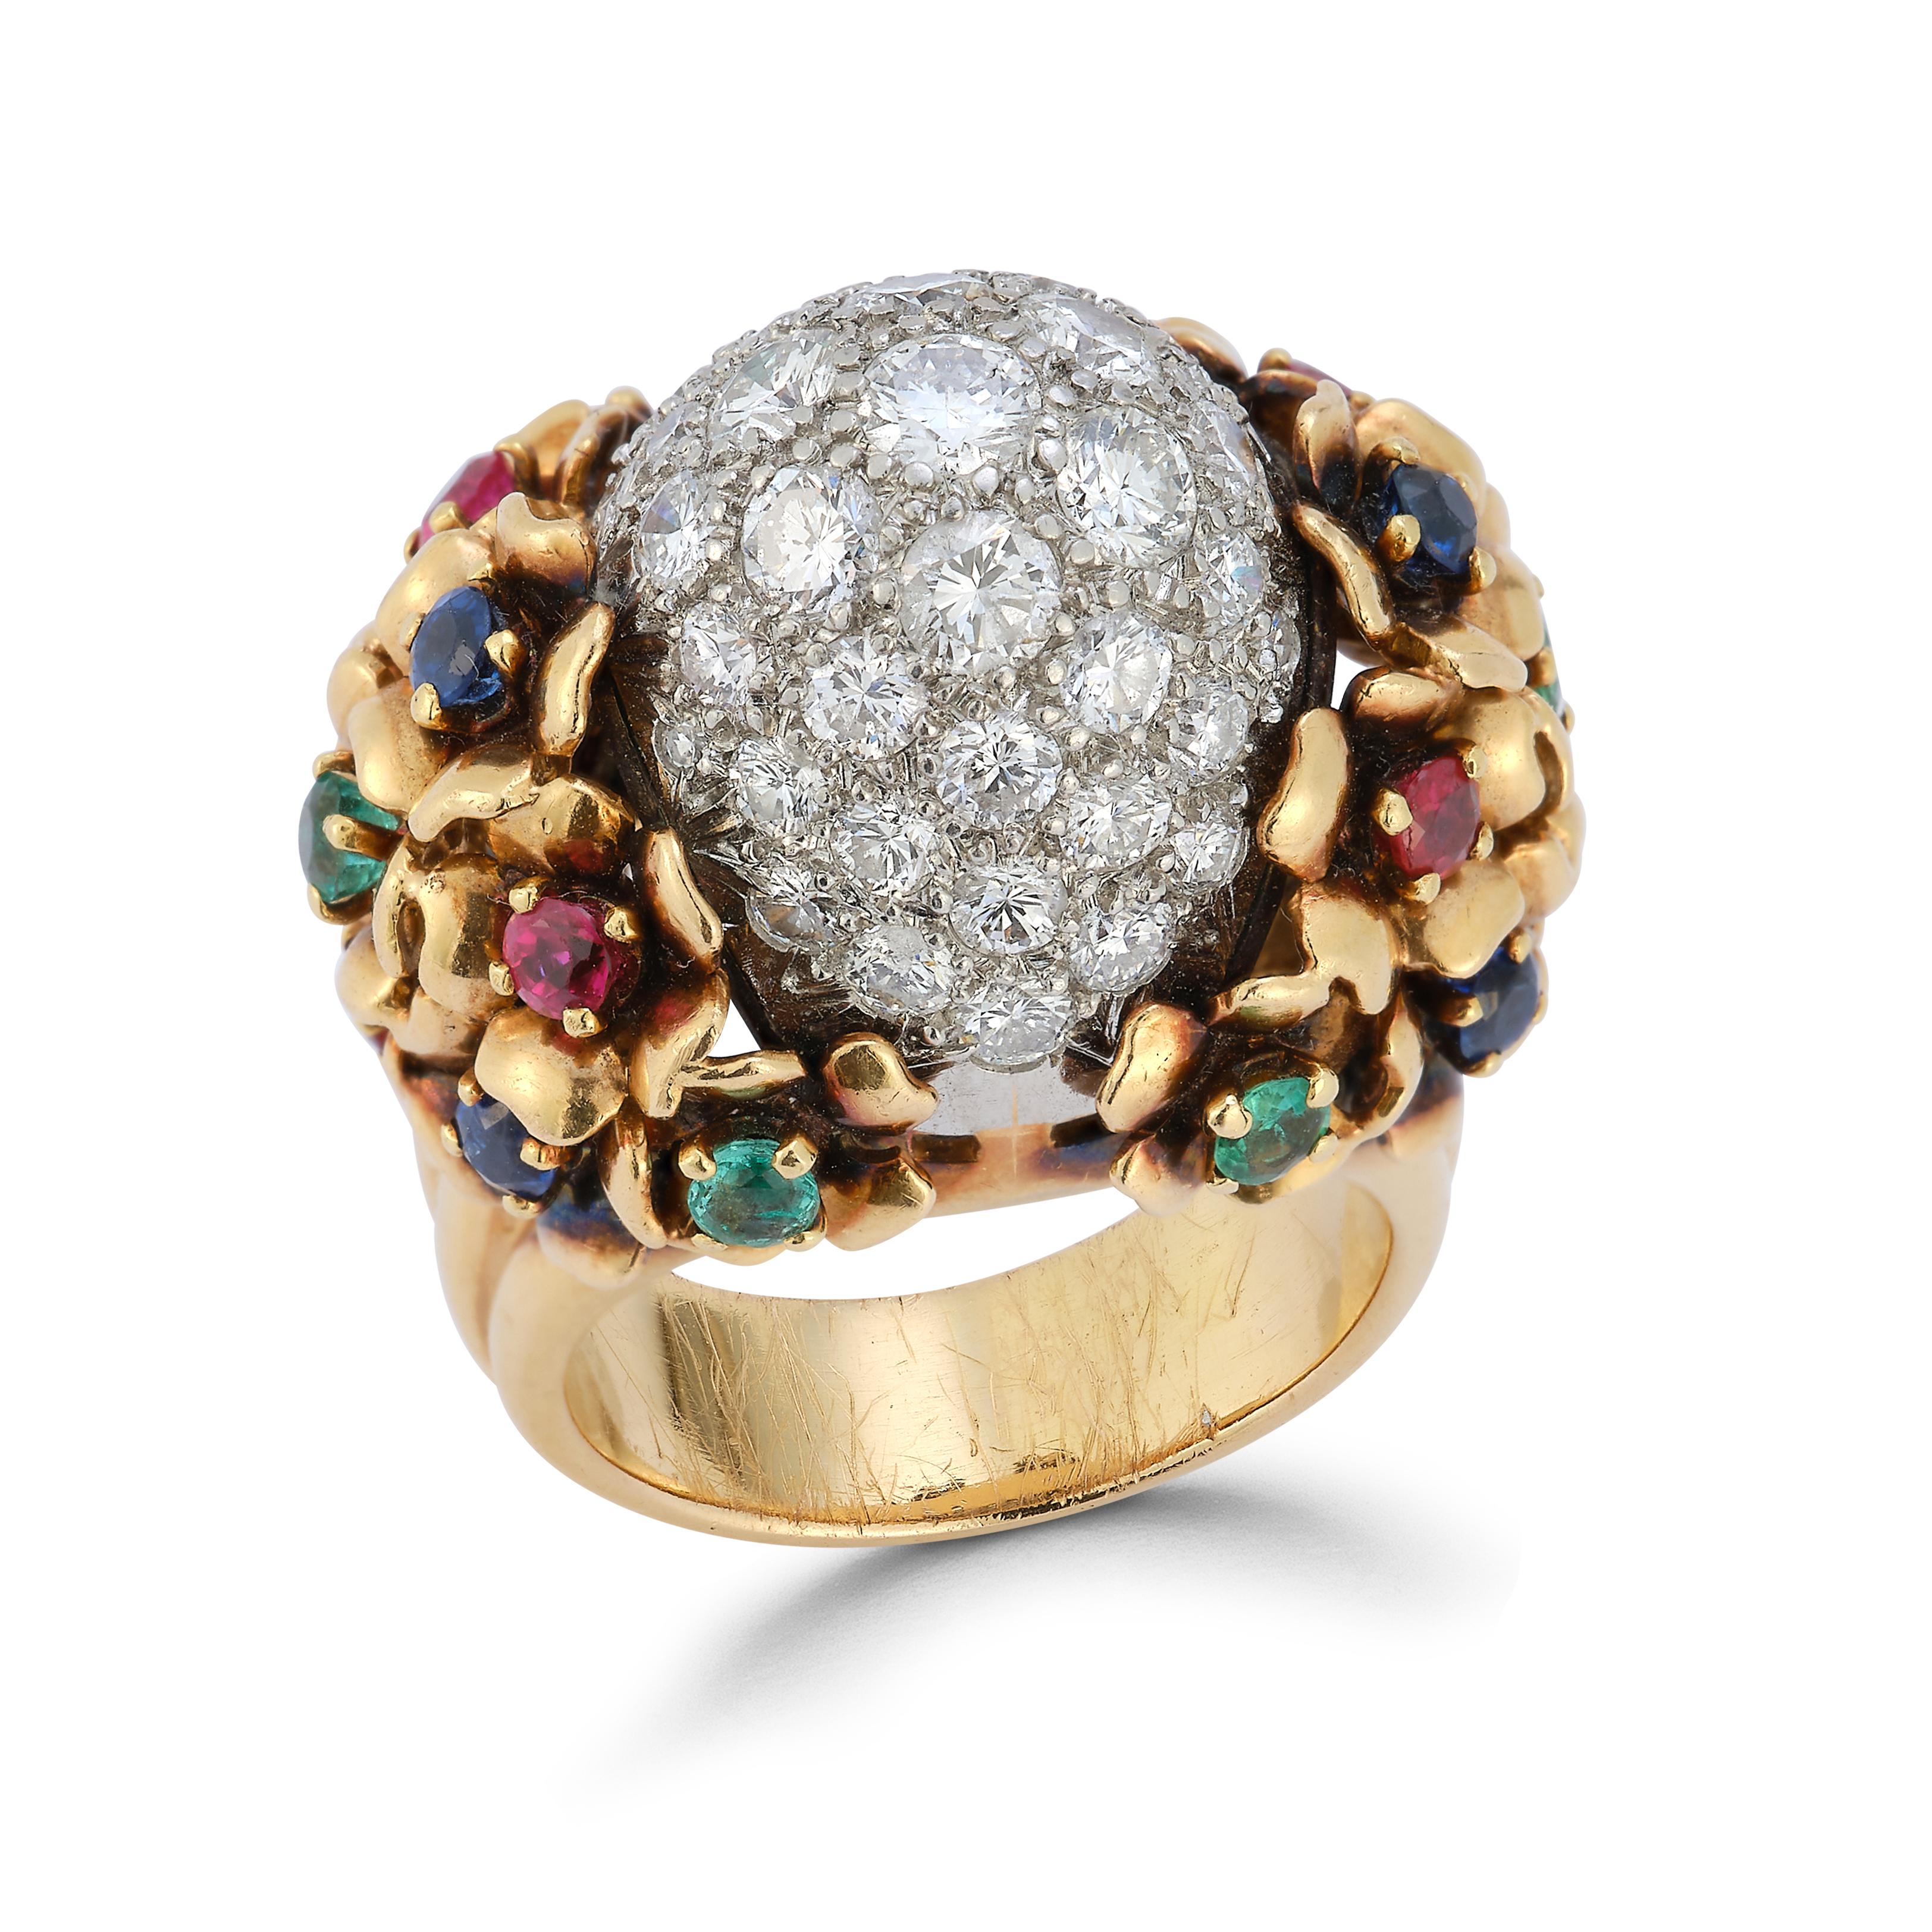 Diamond and Multi Gem Cocktail Dome Ring

Accented with rubies, sapphires, and emeralds.

Made circa 1940

18 Karat gold

Ring Size: 7.5

Sizable to any size